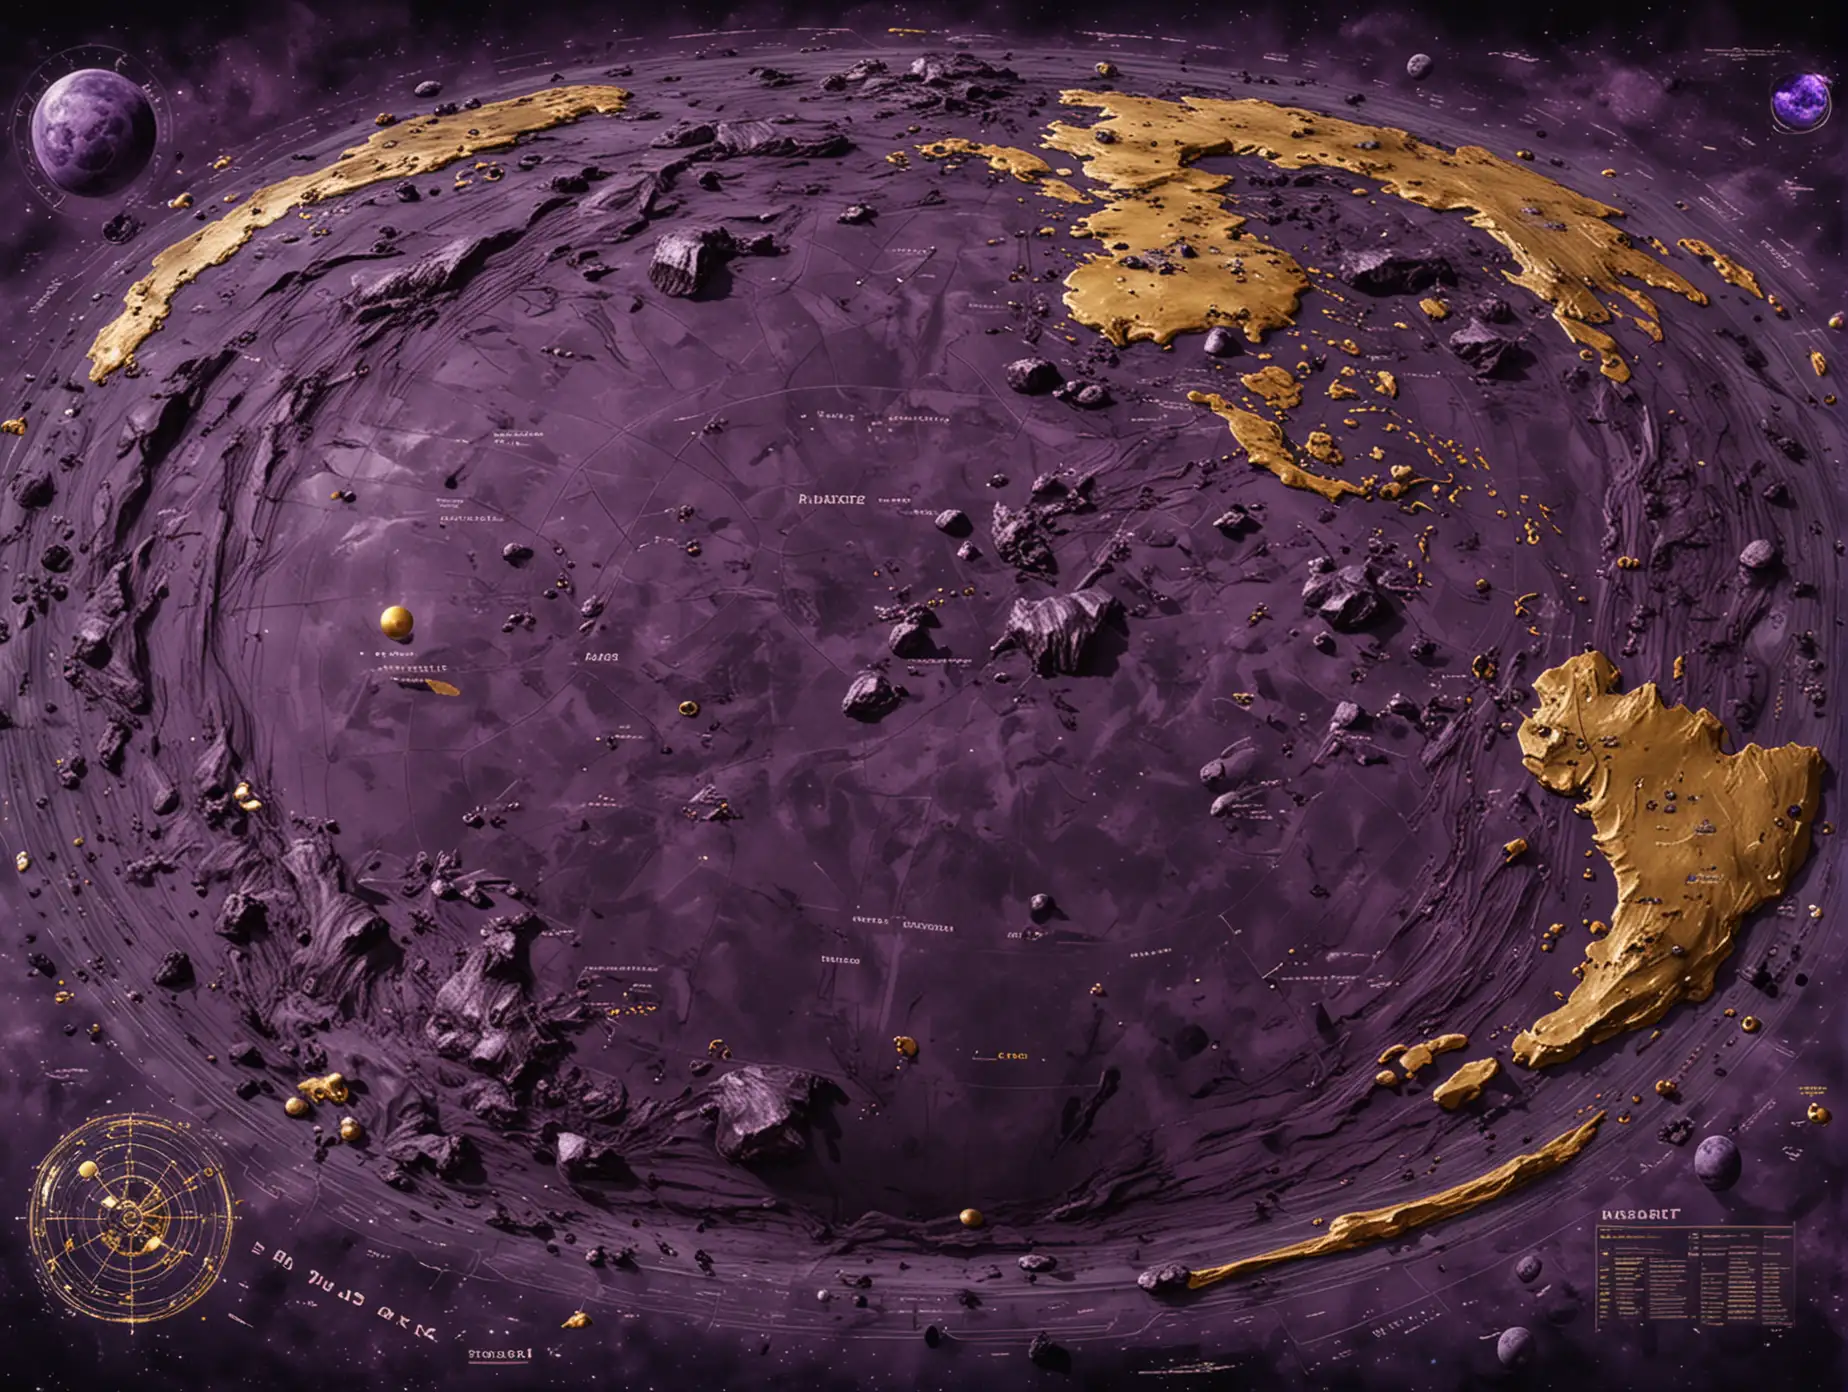 Exploring-the-Vast-Abandoned-BlackPurple-Planet-Unmarked-Map-with-Hidden-Treasures